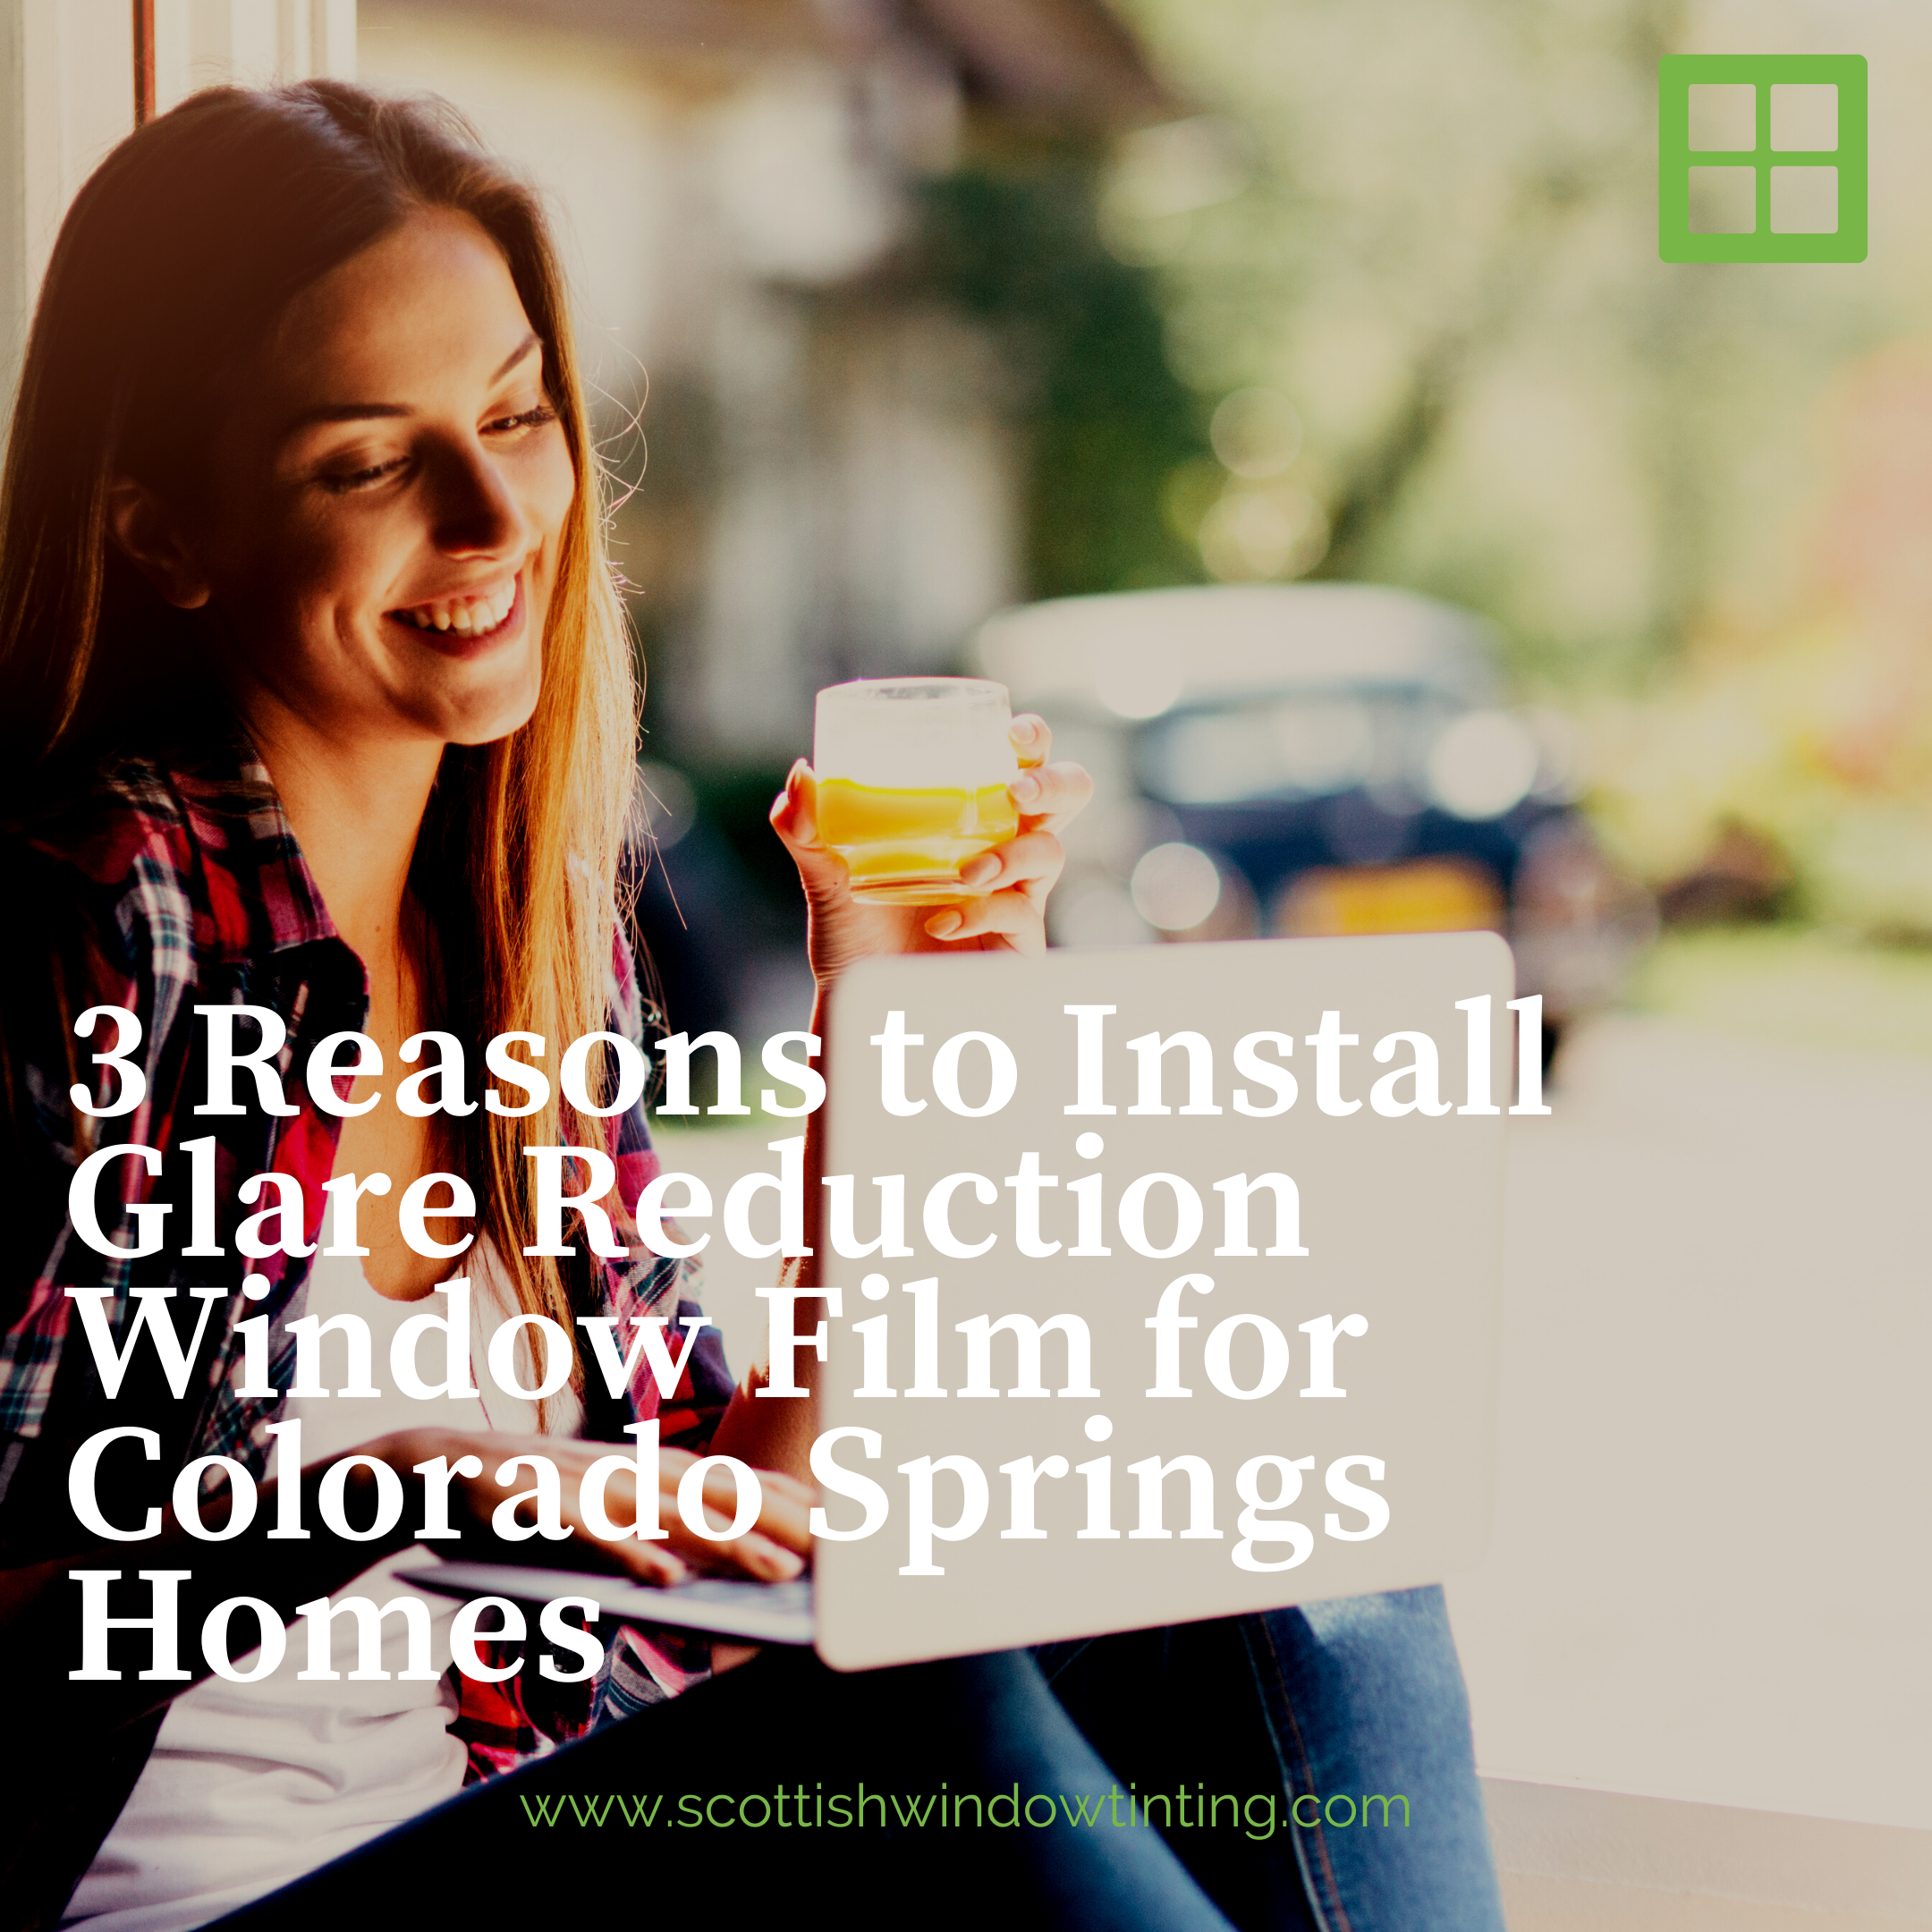 3 Reasons to Install Glare Reduction Window Film for Colorado Springs Homes